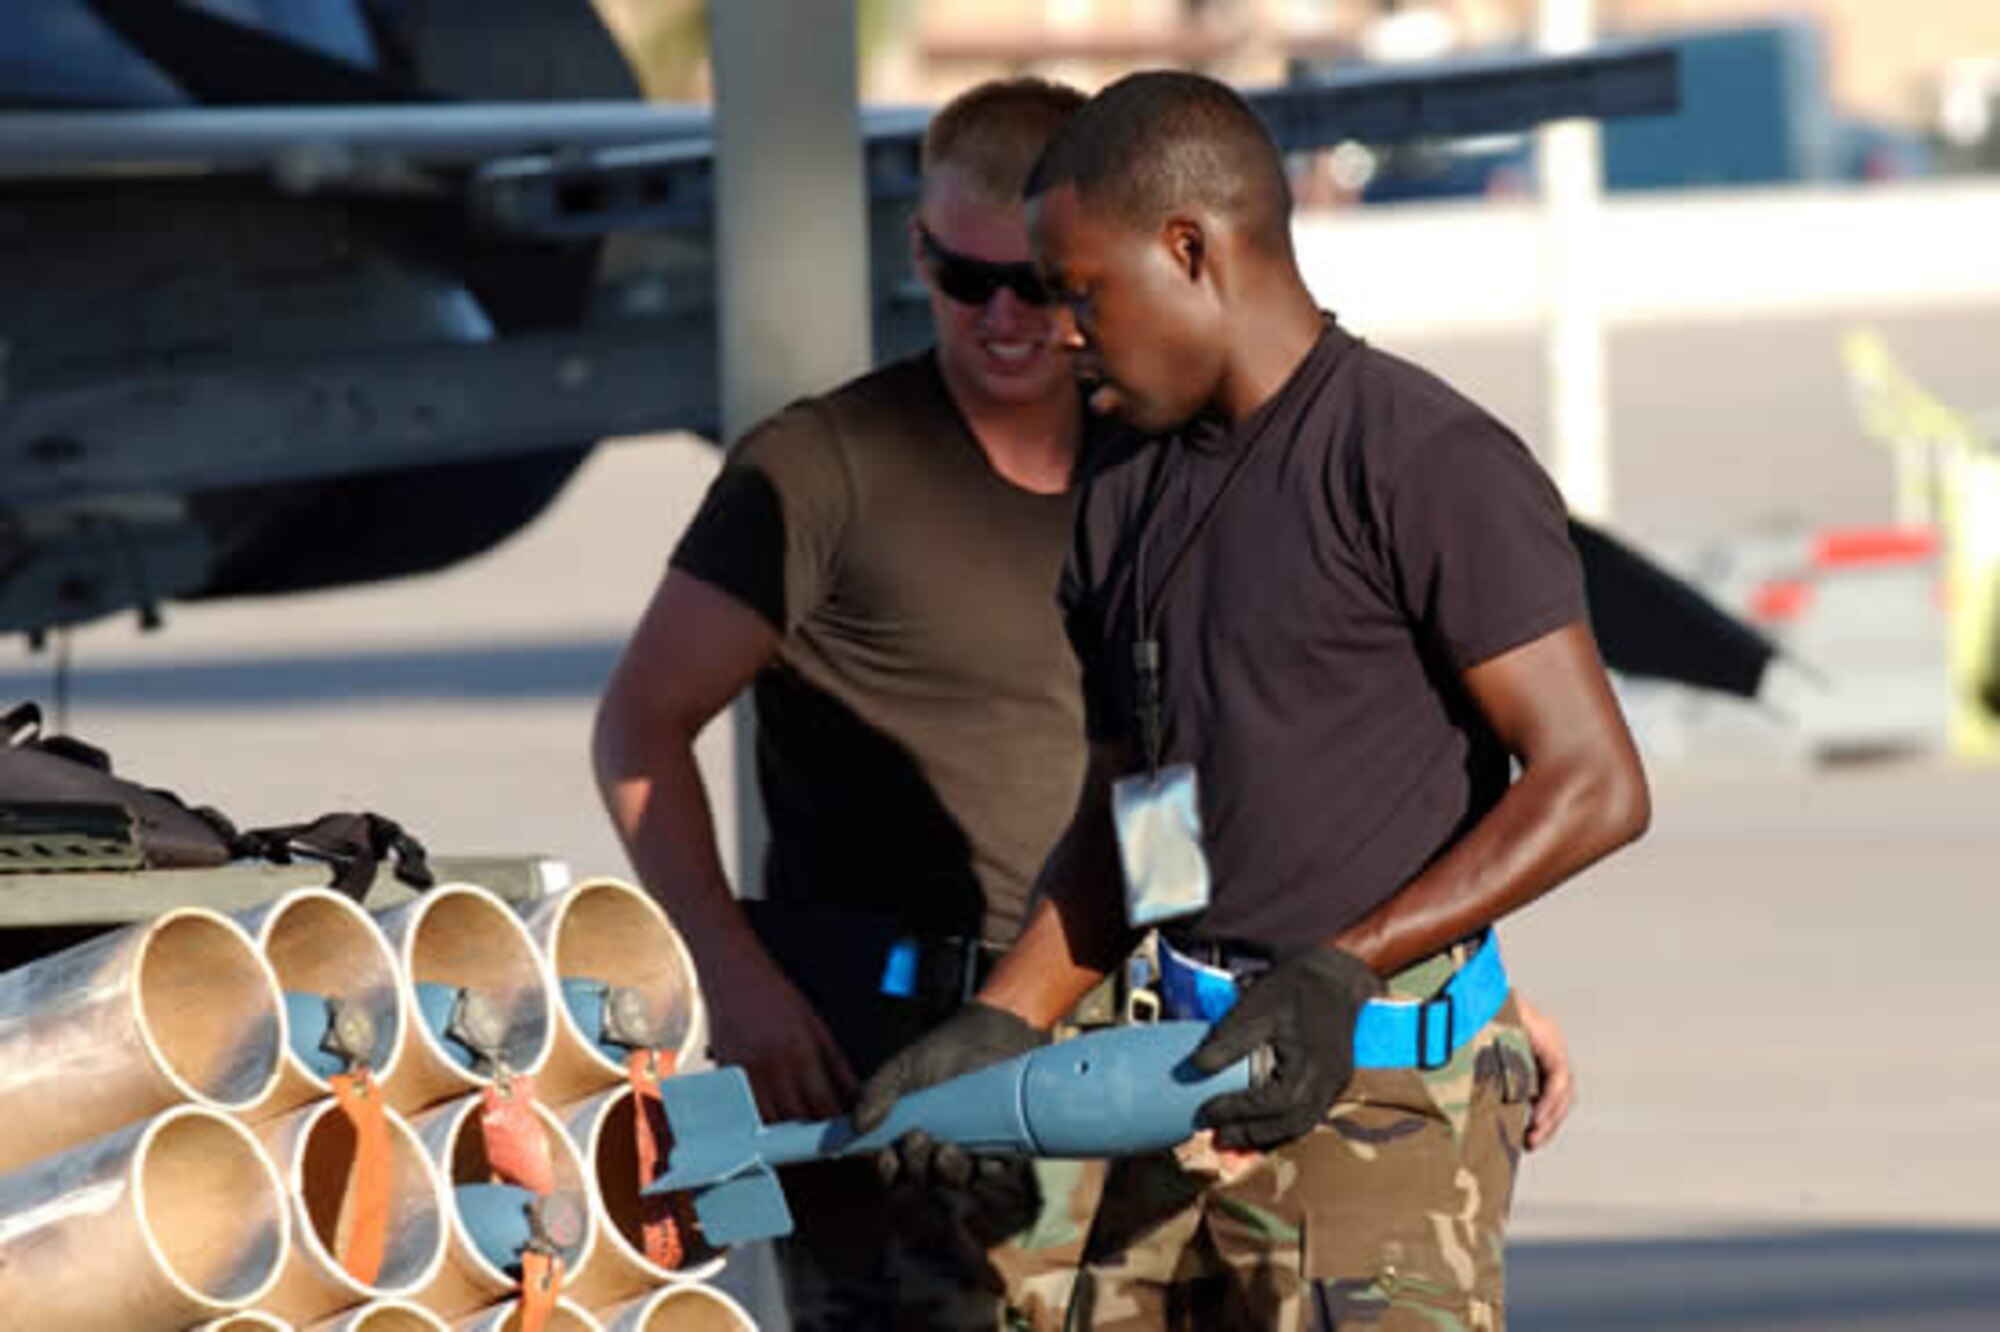 Senior Airman James Mitchell and Airman 1st Class Quincy Leslie, weapons specialists with the 62nd Aircraft Maintenance Unit, transfer BDU-33 practice bombs to another aircraft during routine flight operations. (U.S. Air Force photo/Tech. Sgt. Angela Clemens)